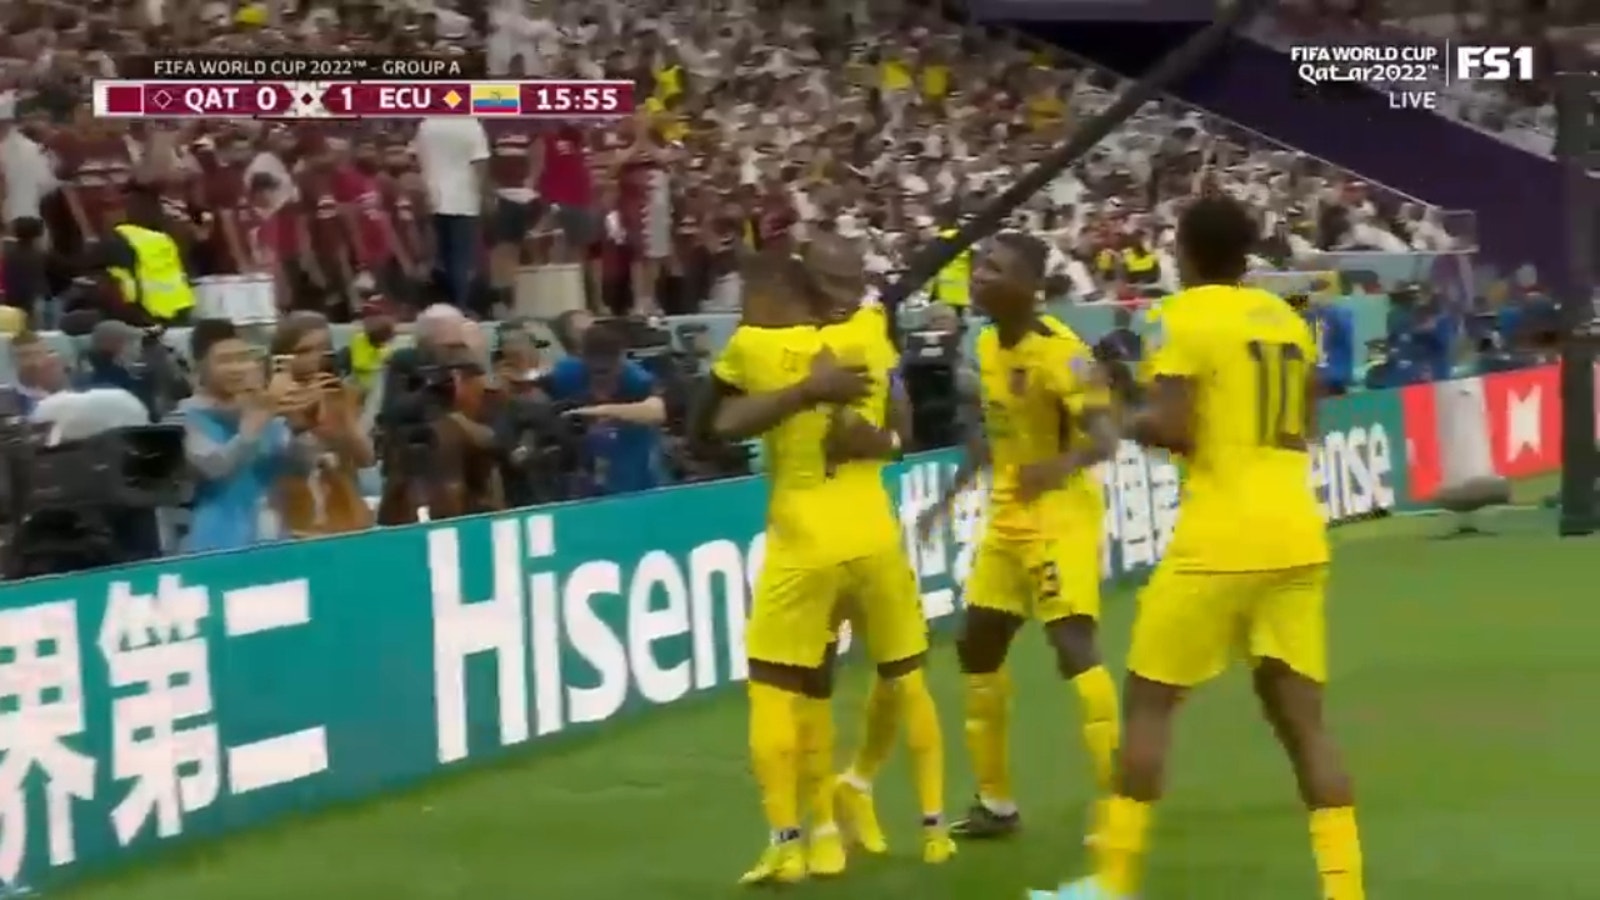 Enner Valencia of Ecuador commits a foul in the box and scores a PK goal against Qatar 